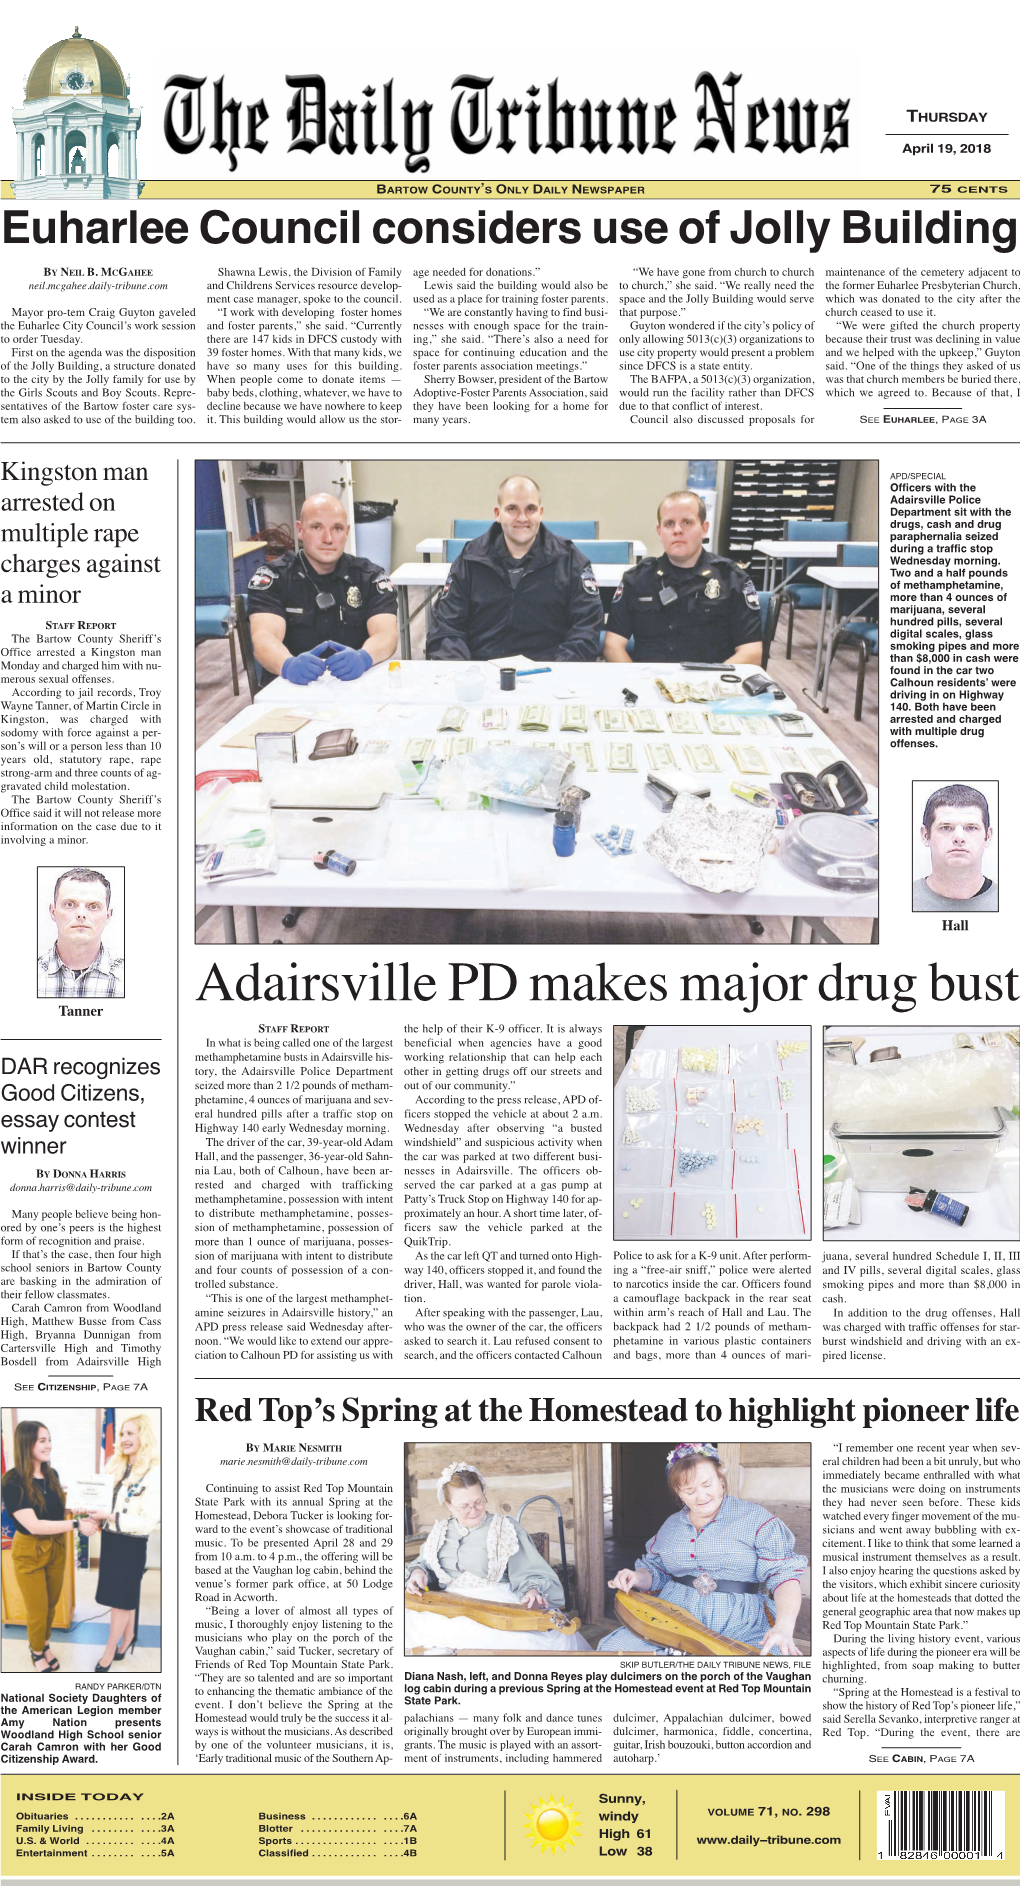 Adairsville PD Makes Major Drug Bust Tanner STAFF REPORT the Help of Their K-9 Officer